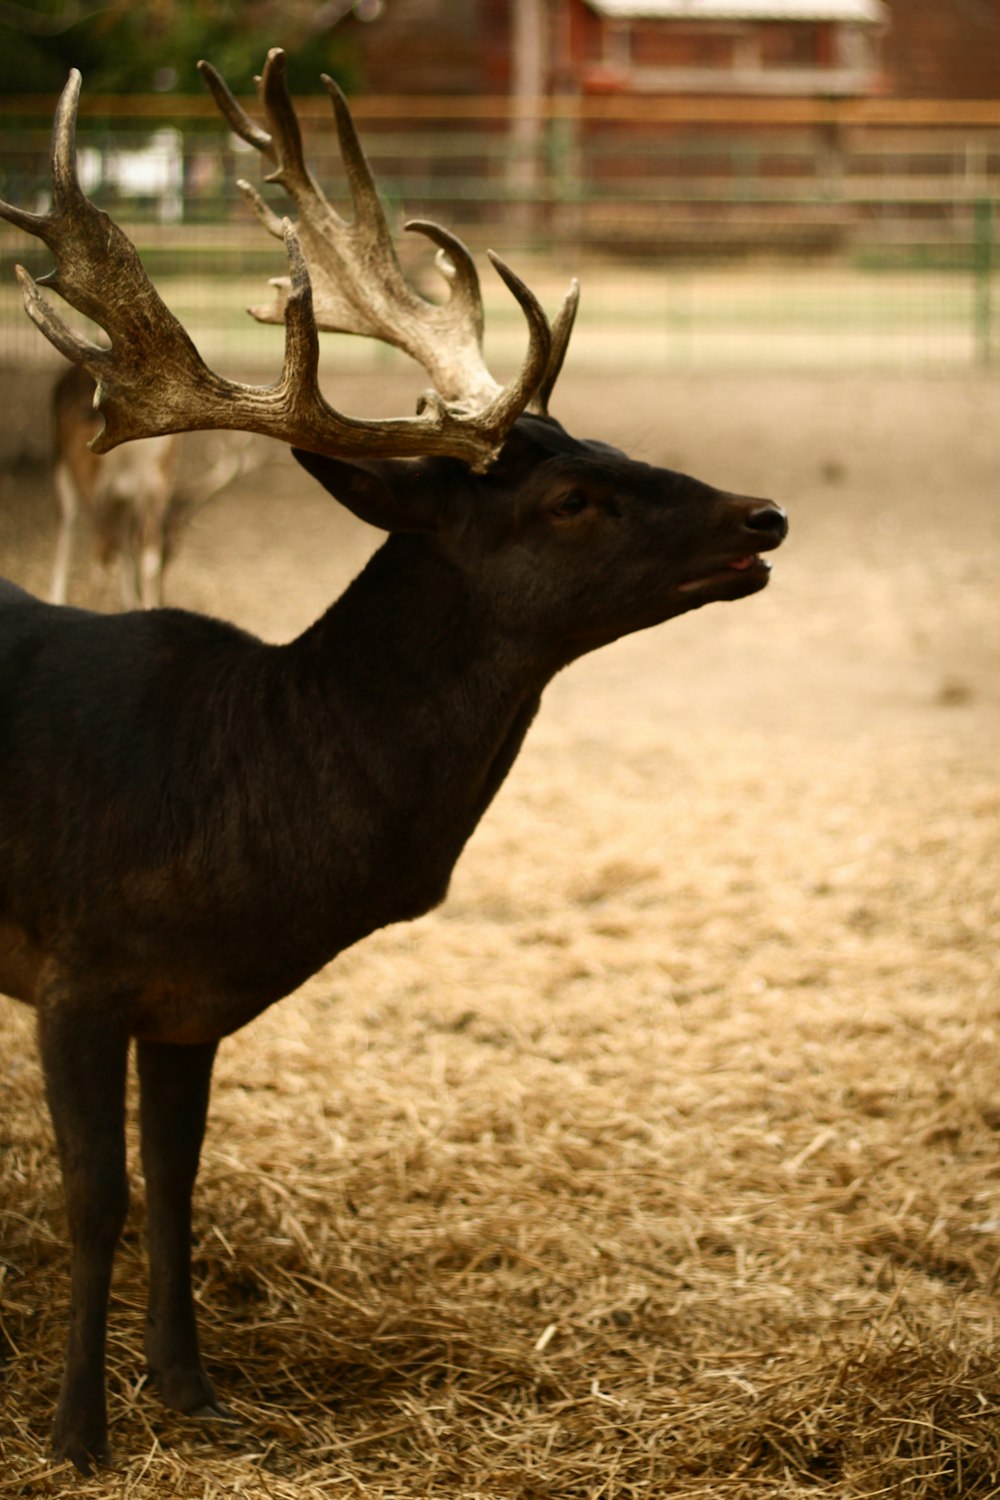 a deer with antlers standing in a pen